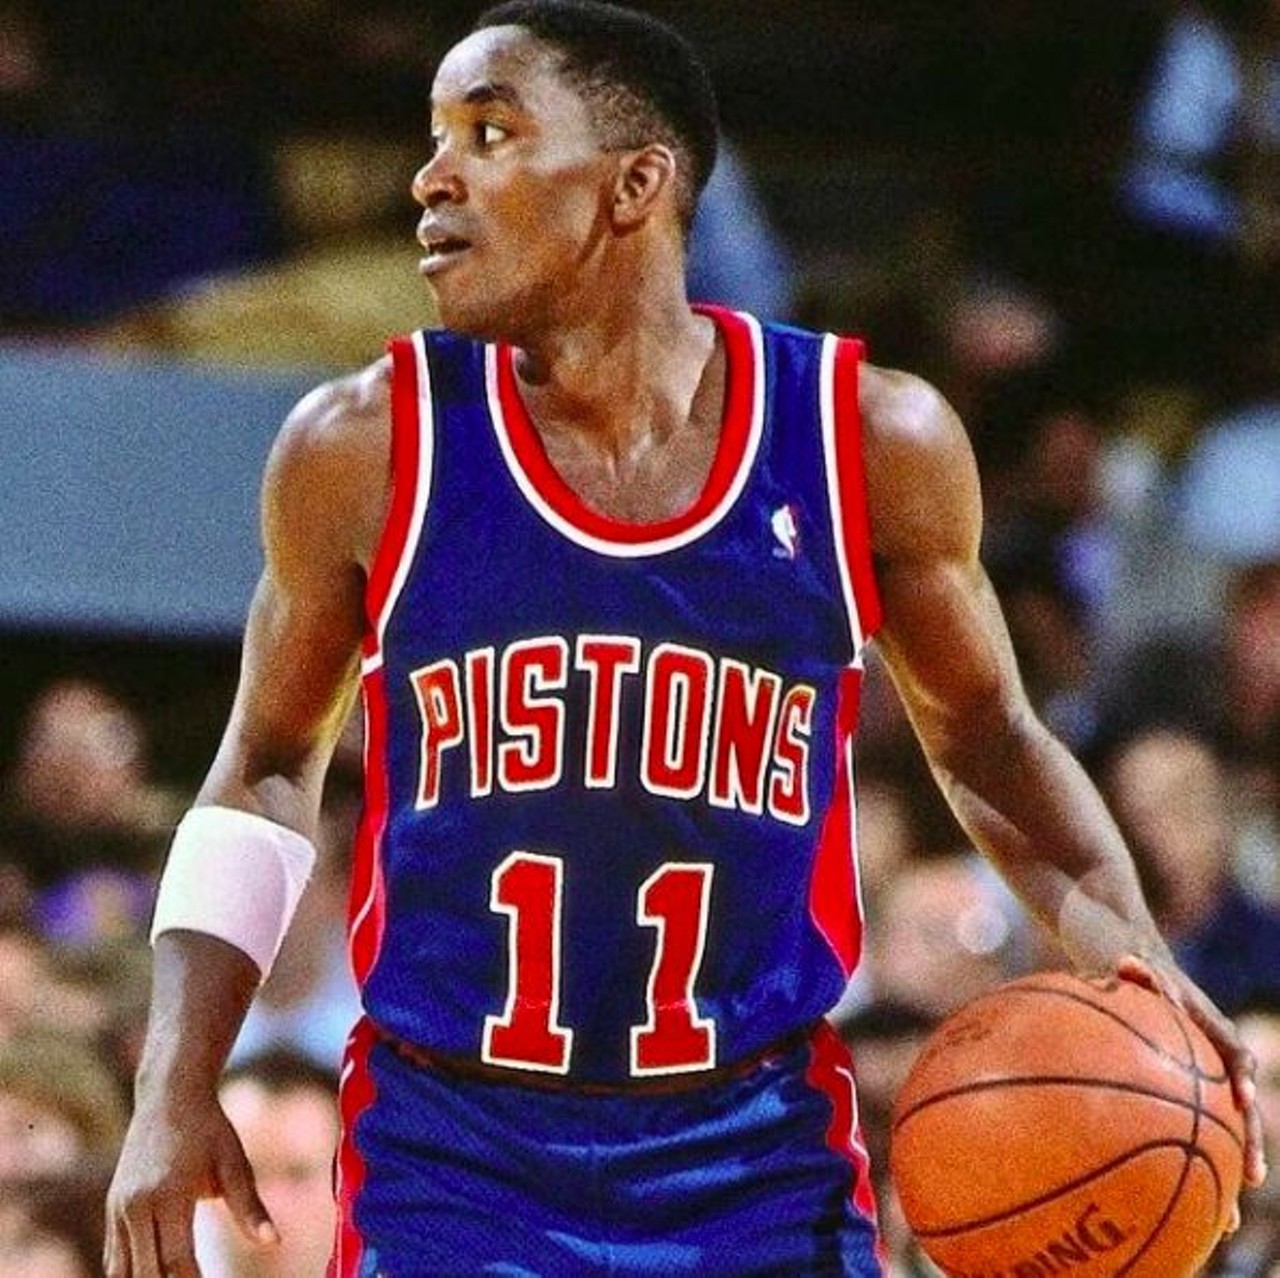 Isiah Thomas
Photo via Instagram
Isiah Thomas is a retired point guard who played for the Detroit Pistons from 1981 to 1994. Among his many accolades and achievements, Thomas is a two-time NBA champion, NBA Finals MVP, 12-time NBA All-Star, two-time NBA All-Star Game MVP, an NCAA champion, and an All-American. His jersey, No. 11, was retired by the Pistons in 1996.
cameo.com/isiahthomas